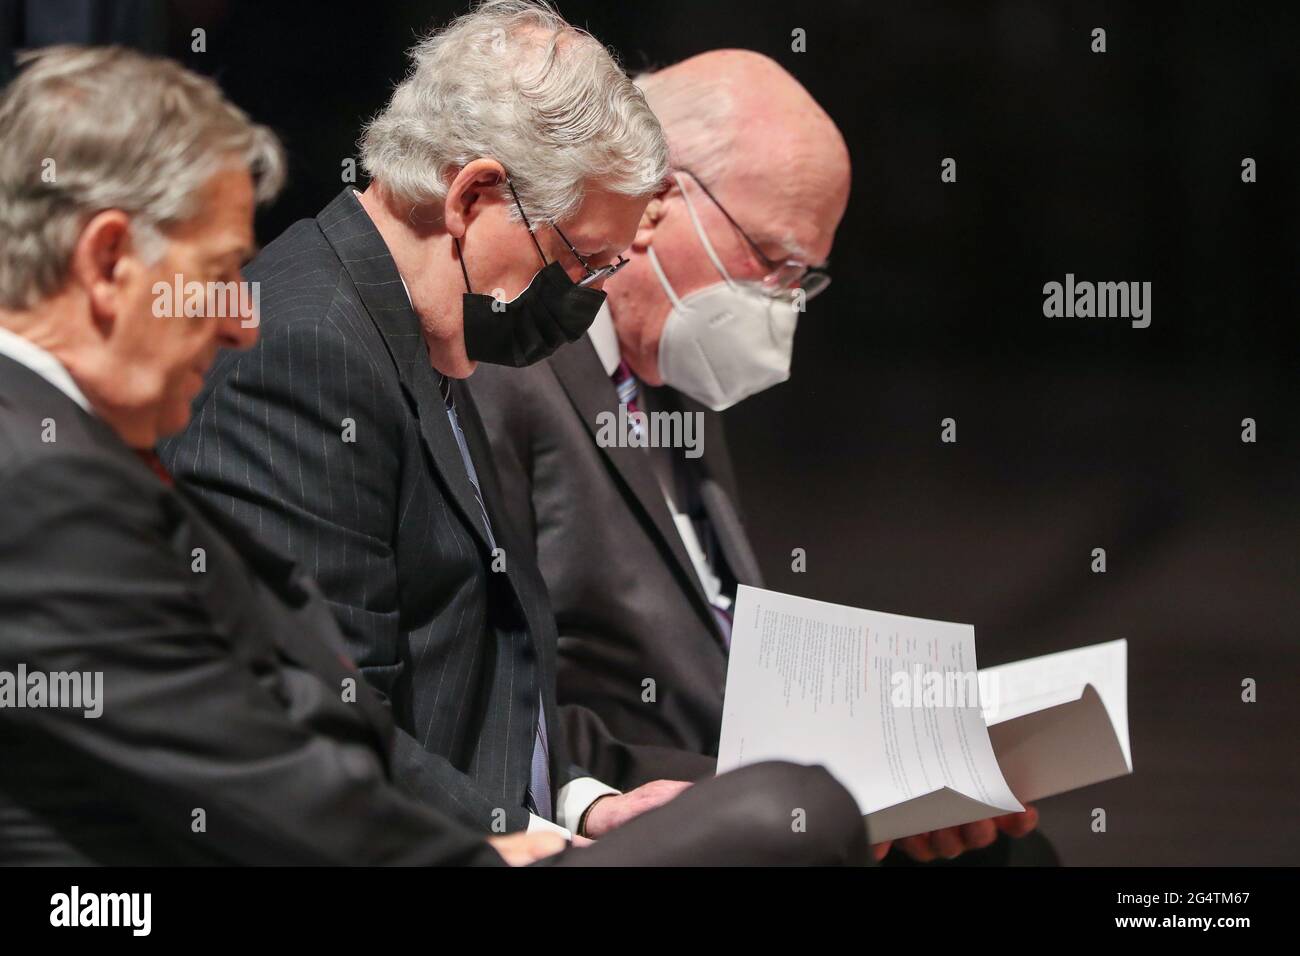 Senate Minority Leader Mitch McConnell (R-KY) and Senator Patrick Leahy (D-VT) attend the funeral ceremony of former Senator John Warner at Washington National Cathedral in Washington, DC, U.S. June 23, 2021. Oliver Contreras/Pool via REUTERS Stock Photo